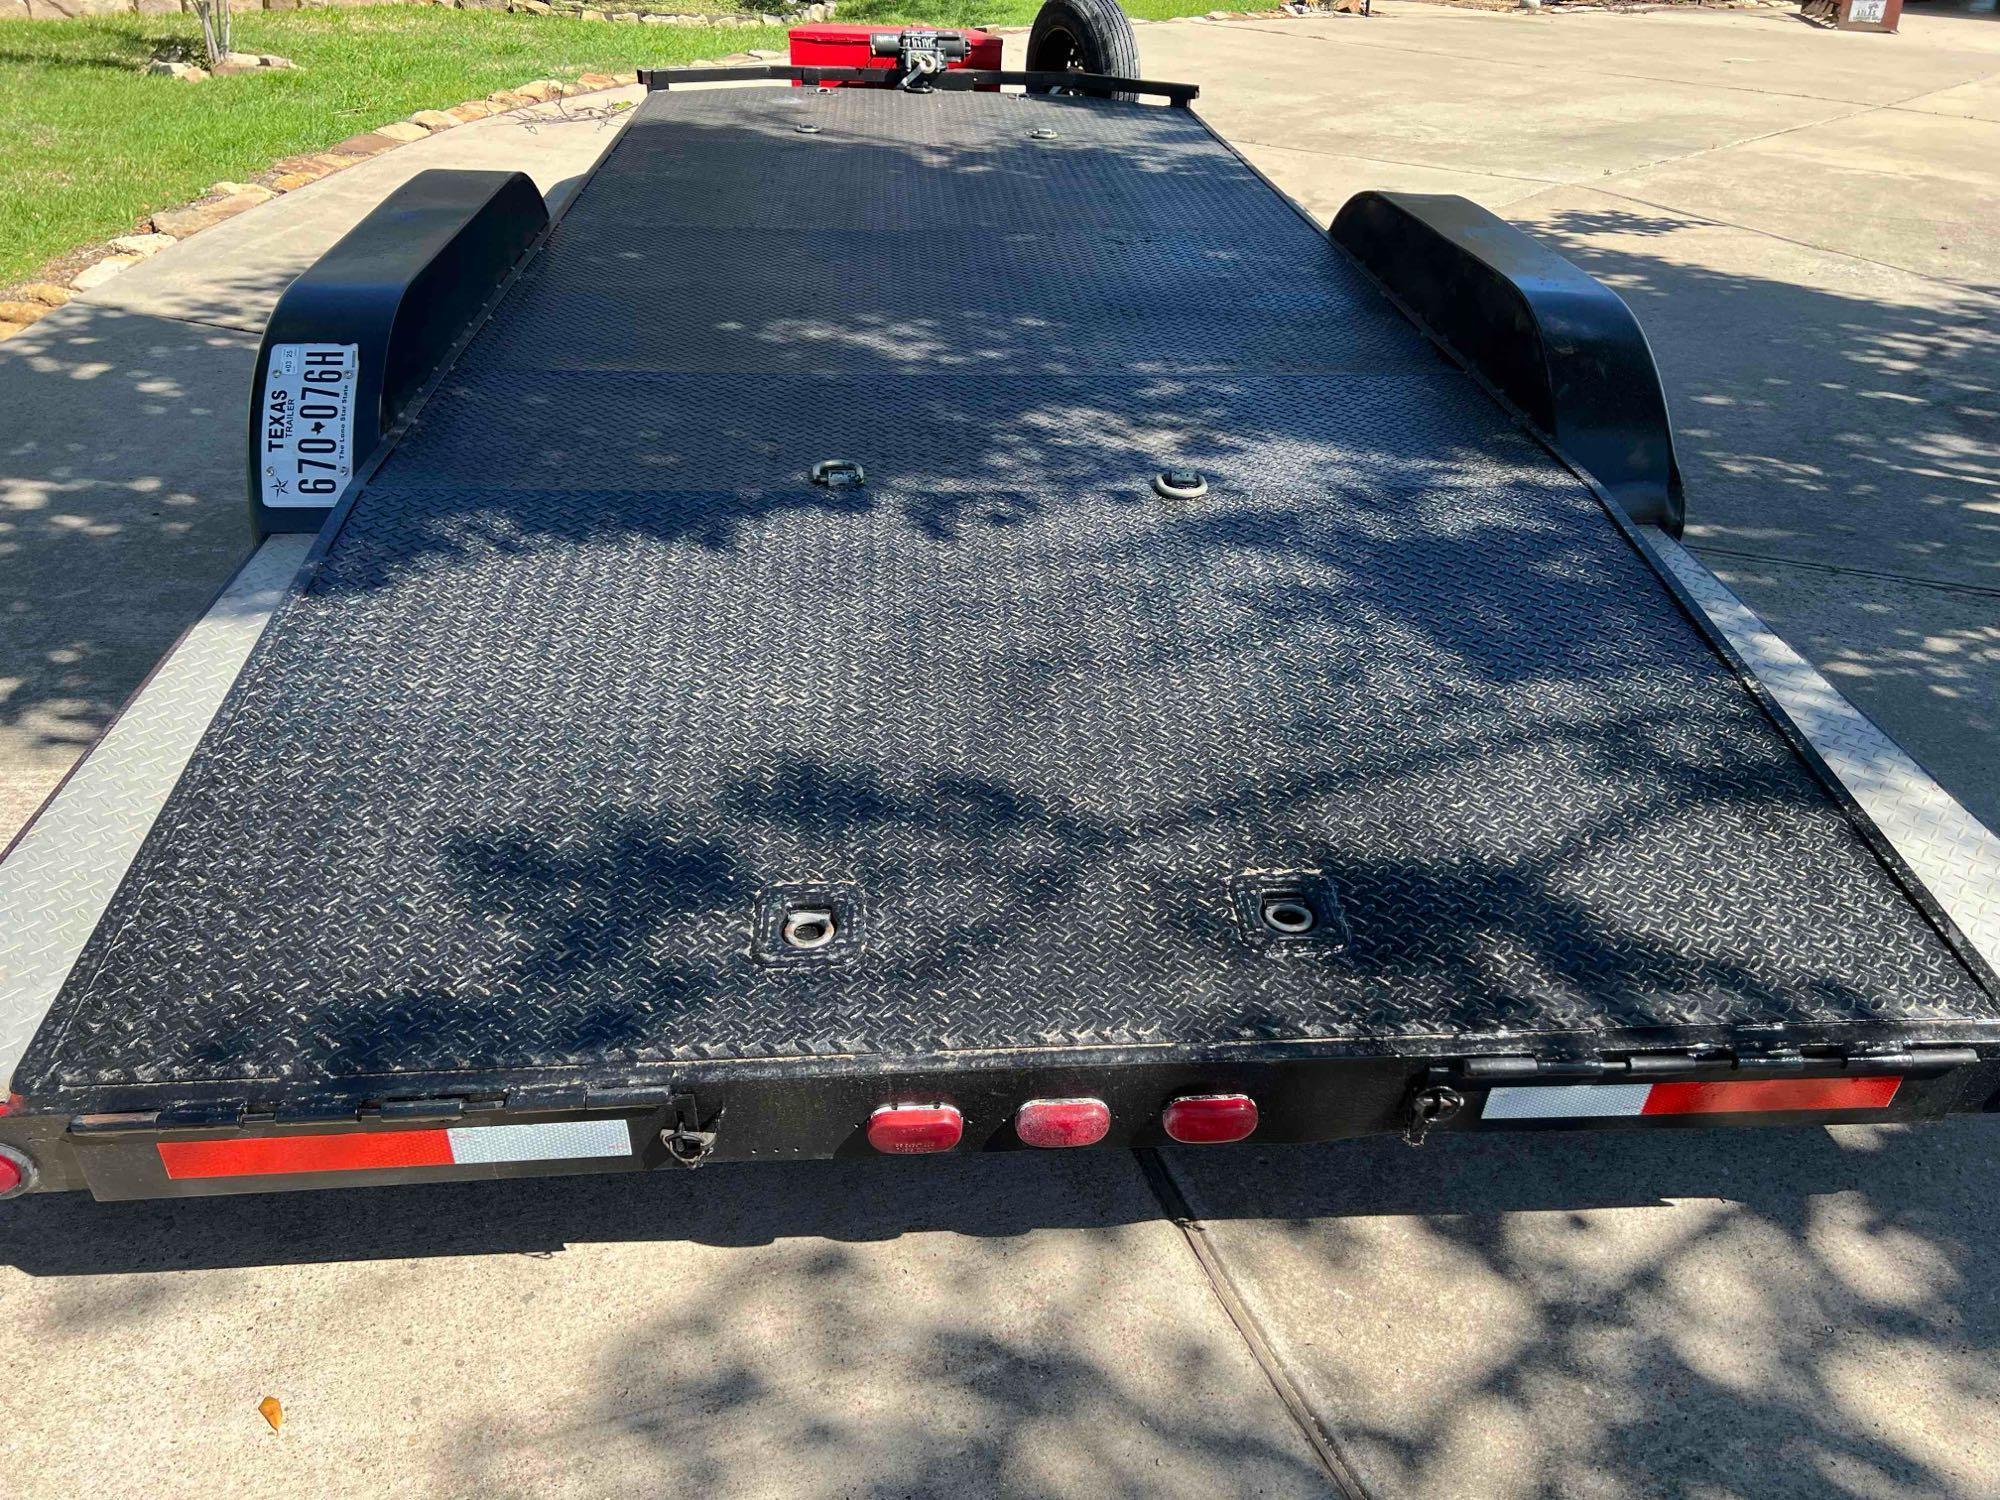 Diamond C Car Hauler Trailer with Winch and Ramps - Super Nice